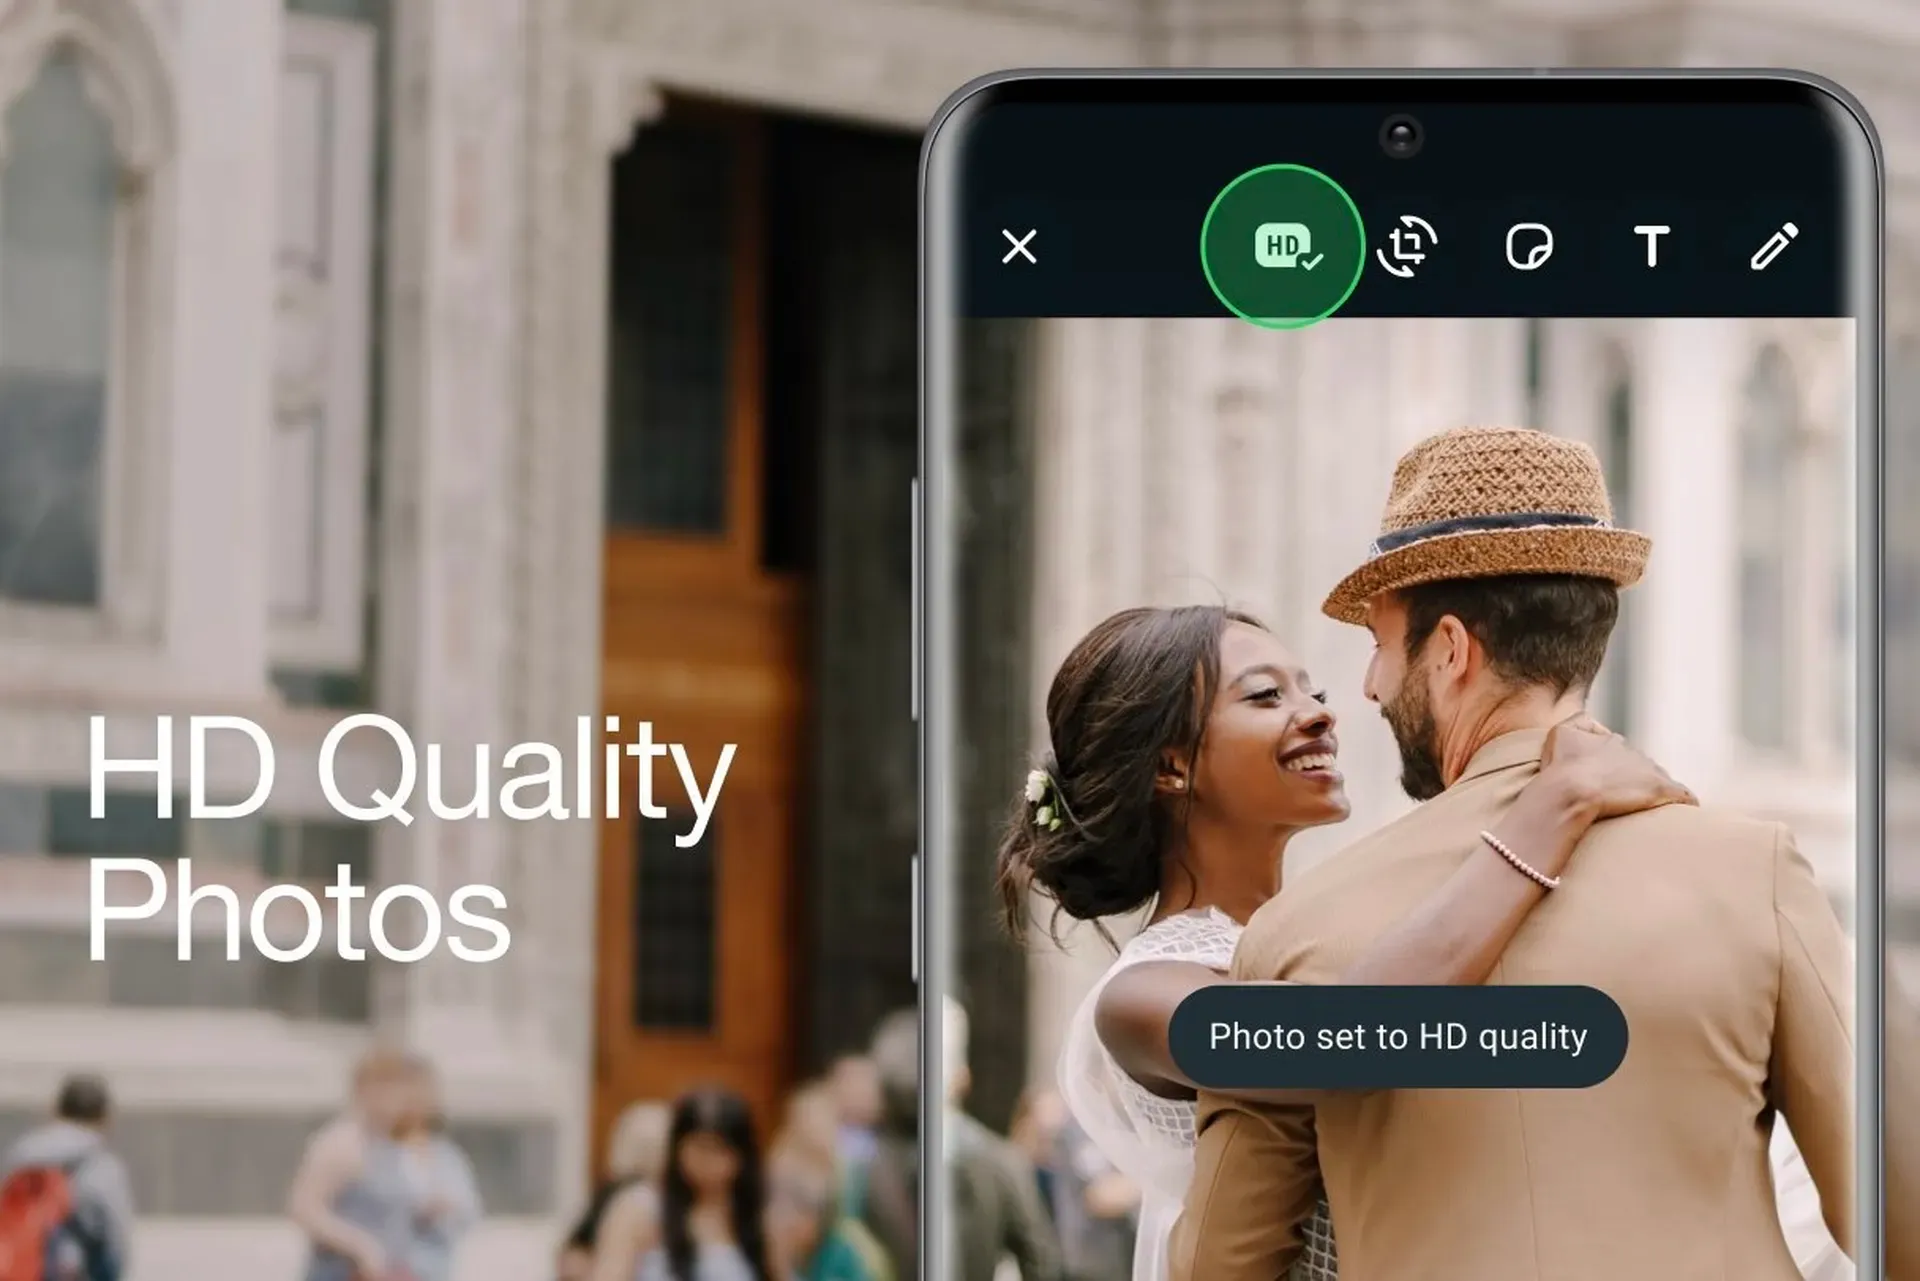 WhatsApp is rolling out a feature that will let users send photos in HD